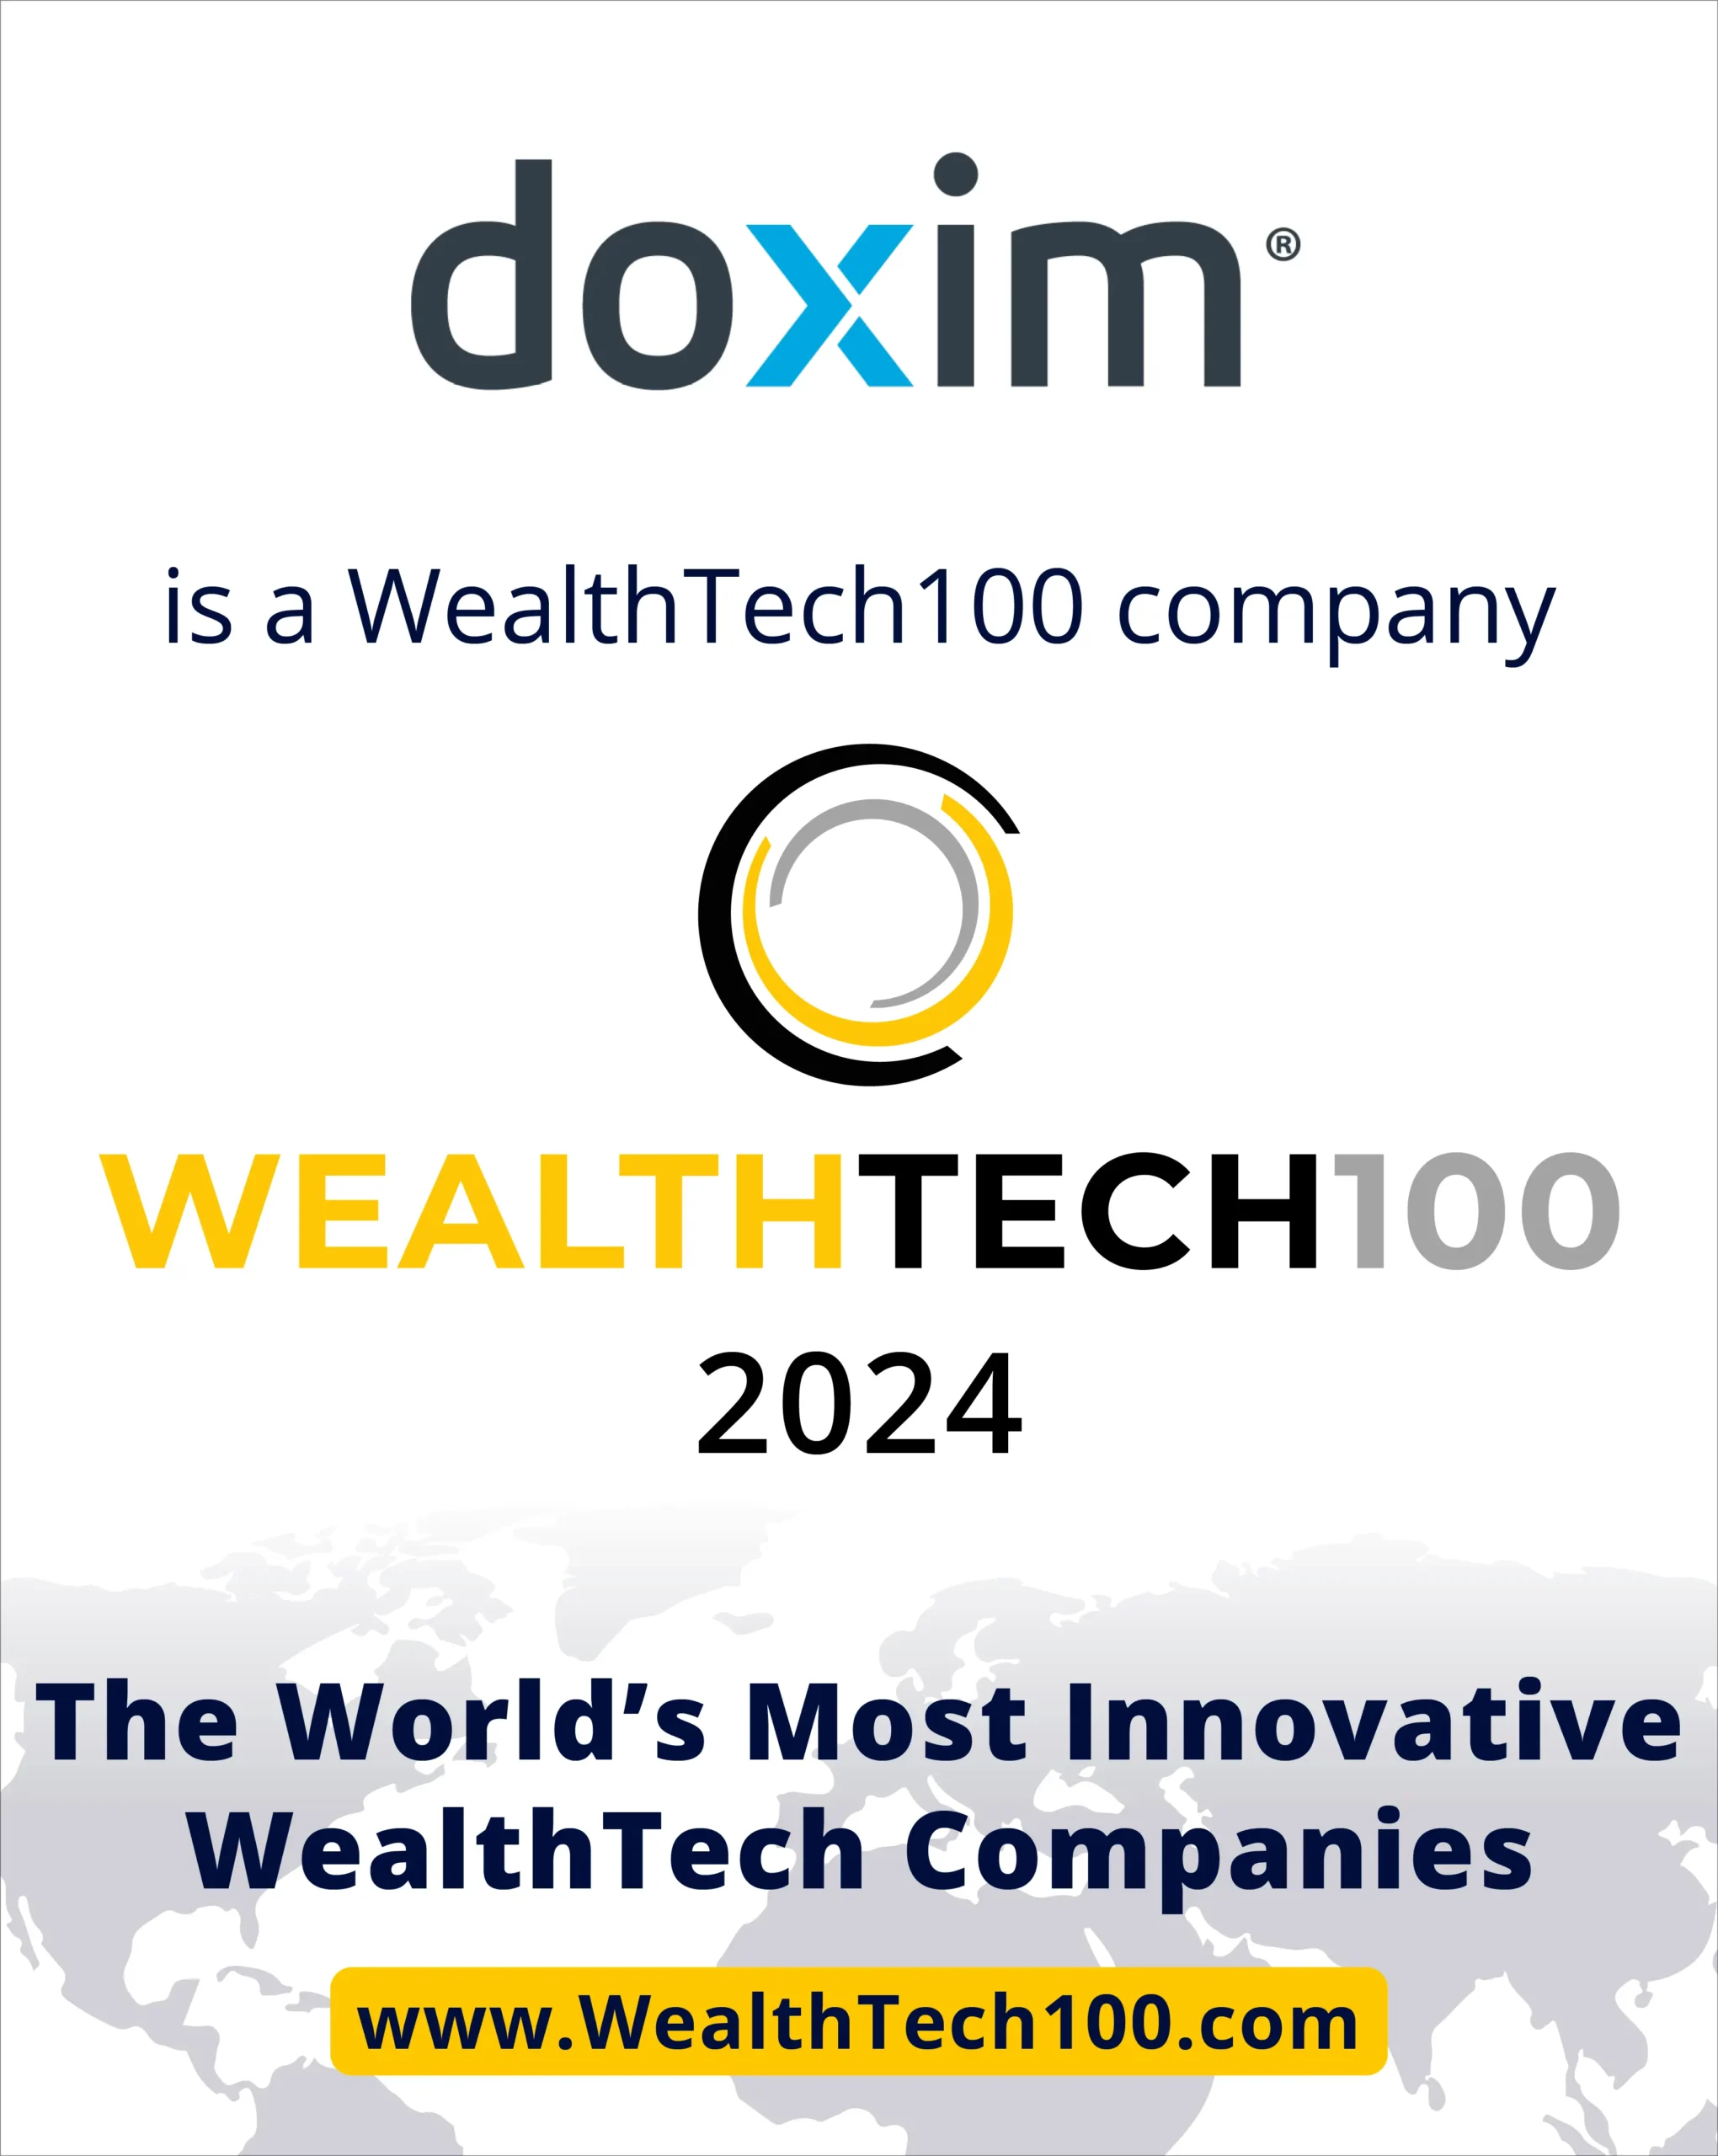 Doxim is a WealthTech100 company 2024. World's most innovative WealthTech companies